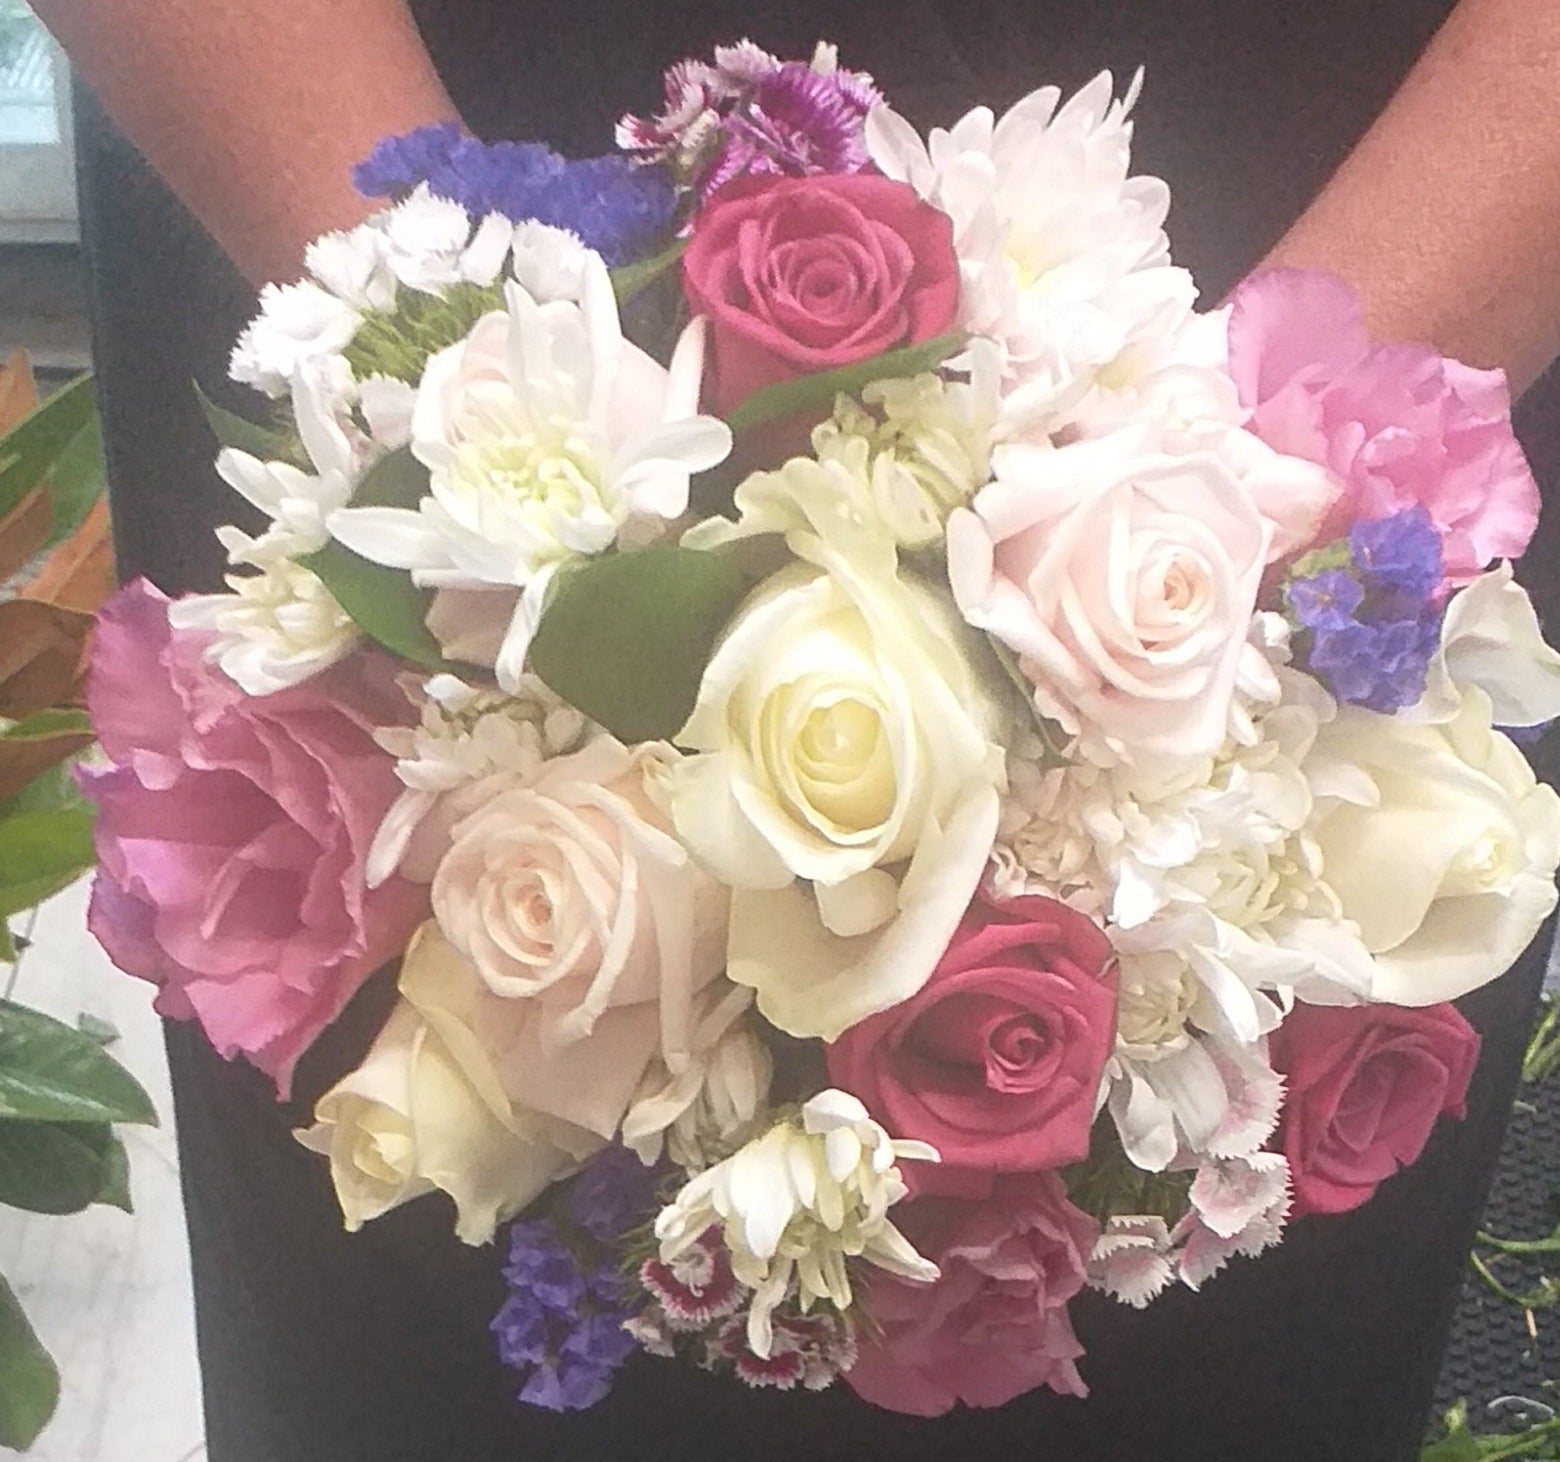 wedding bouquet pink, white, purple, hot pink roses, sweet william, lisianthus, white roses